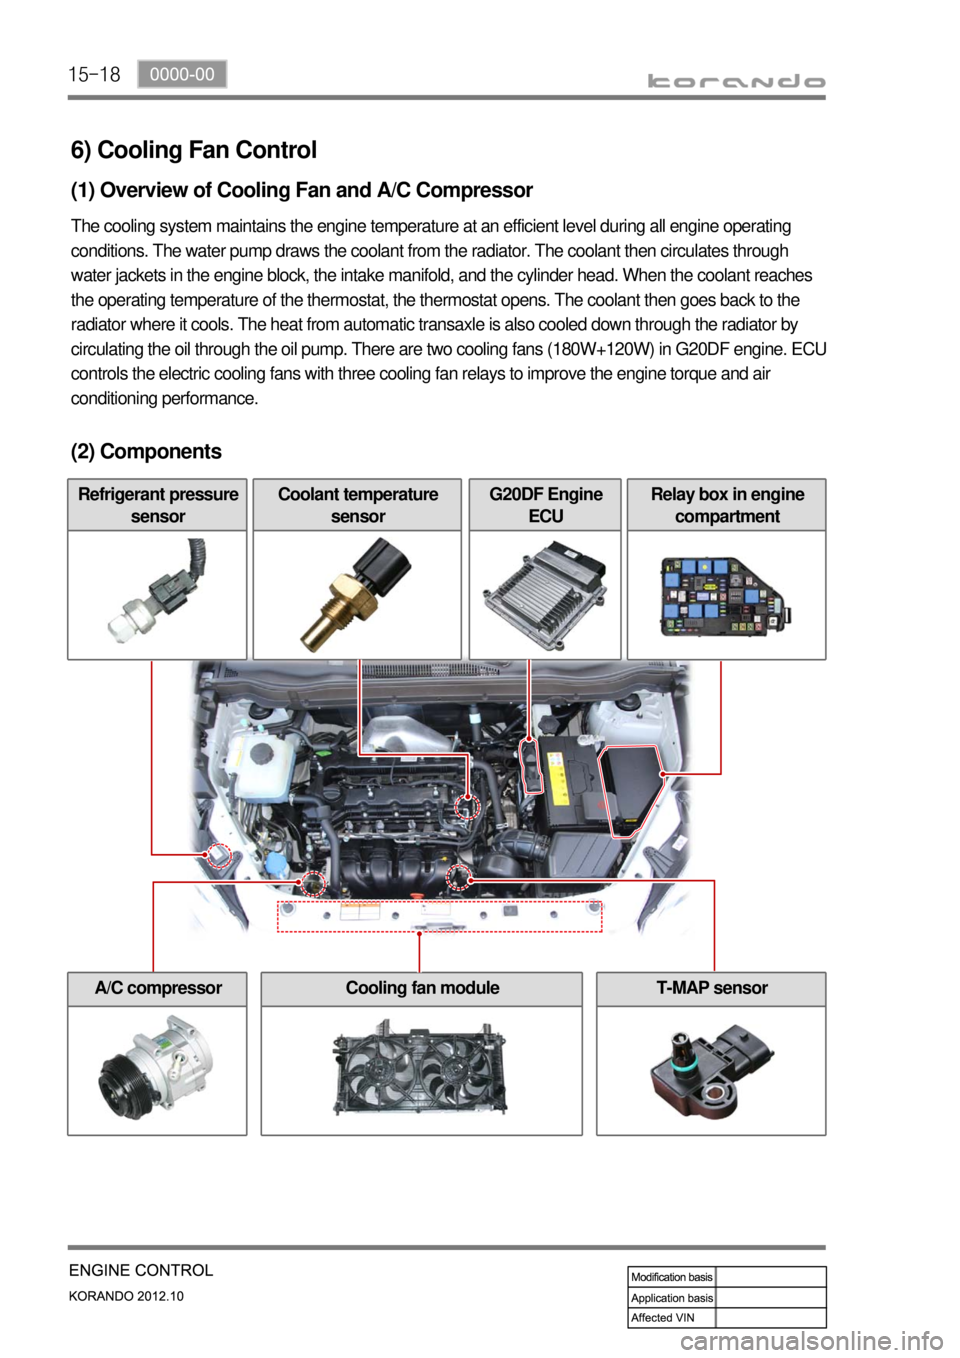 SSANGYONG KORANDO 2012  Service Manual 15-18
6) Cooling Fan Control
(1) Overview of Cooling Fan and A/C Compressor
The cooling system maintains the engine temperature at an efficient level during all engine operating 
conditions. The water